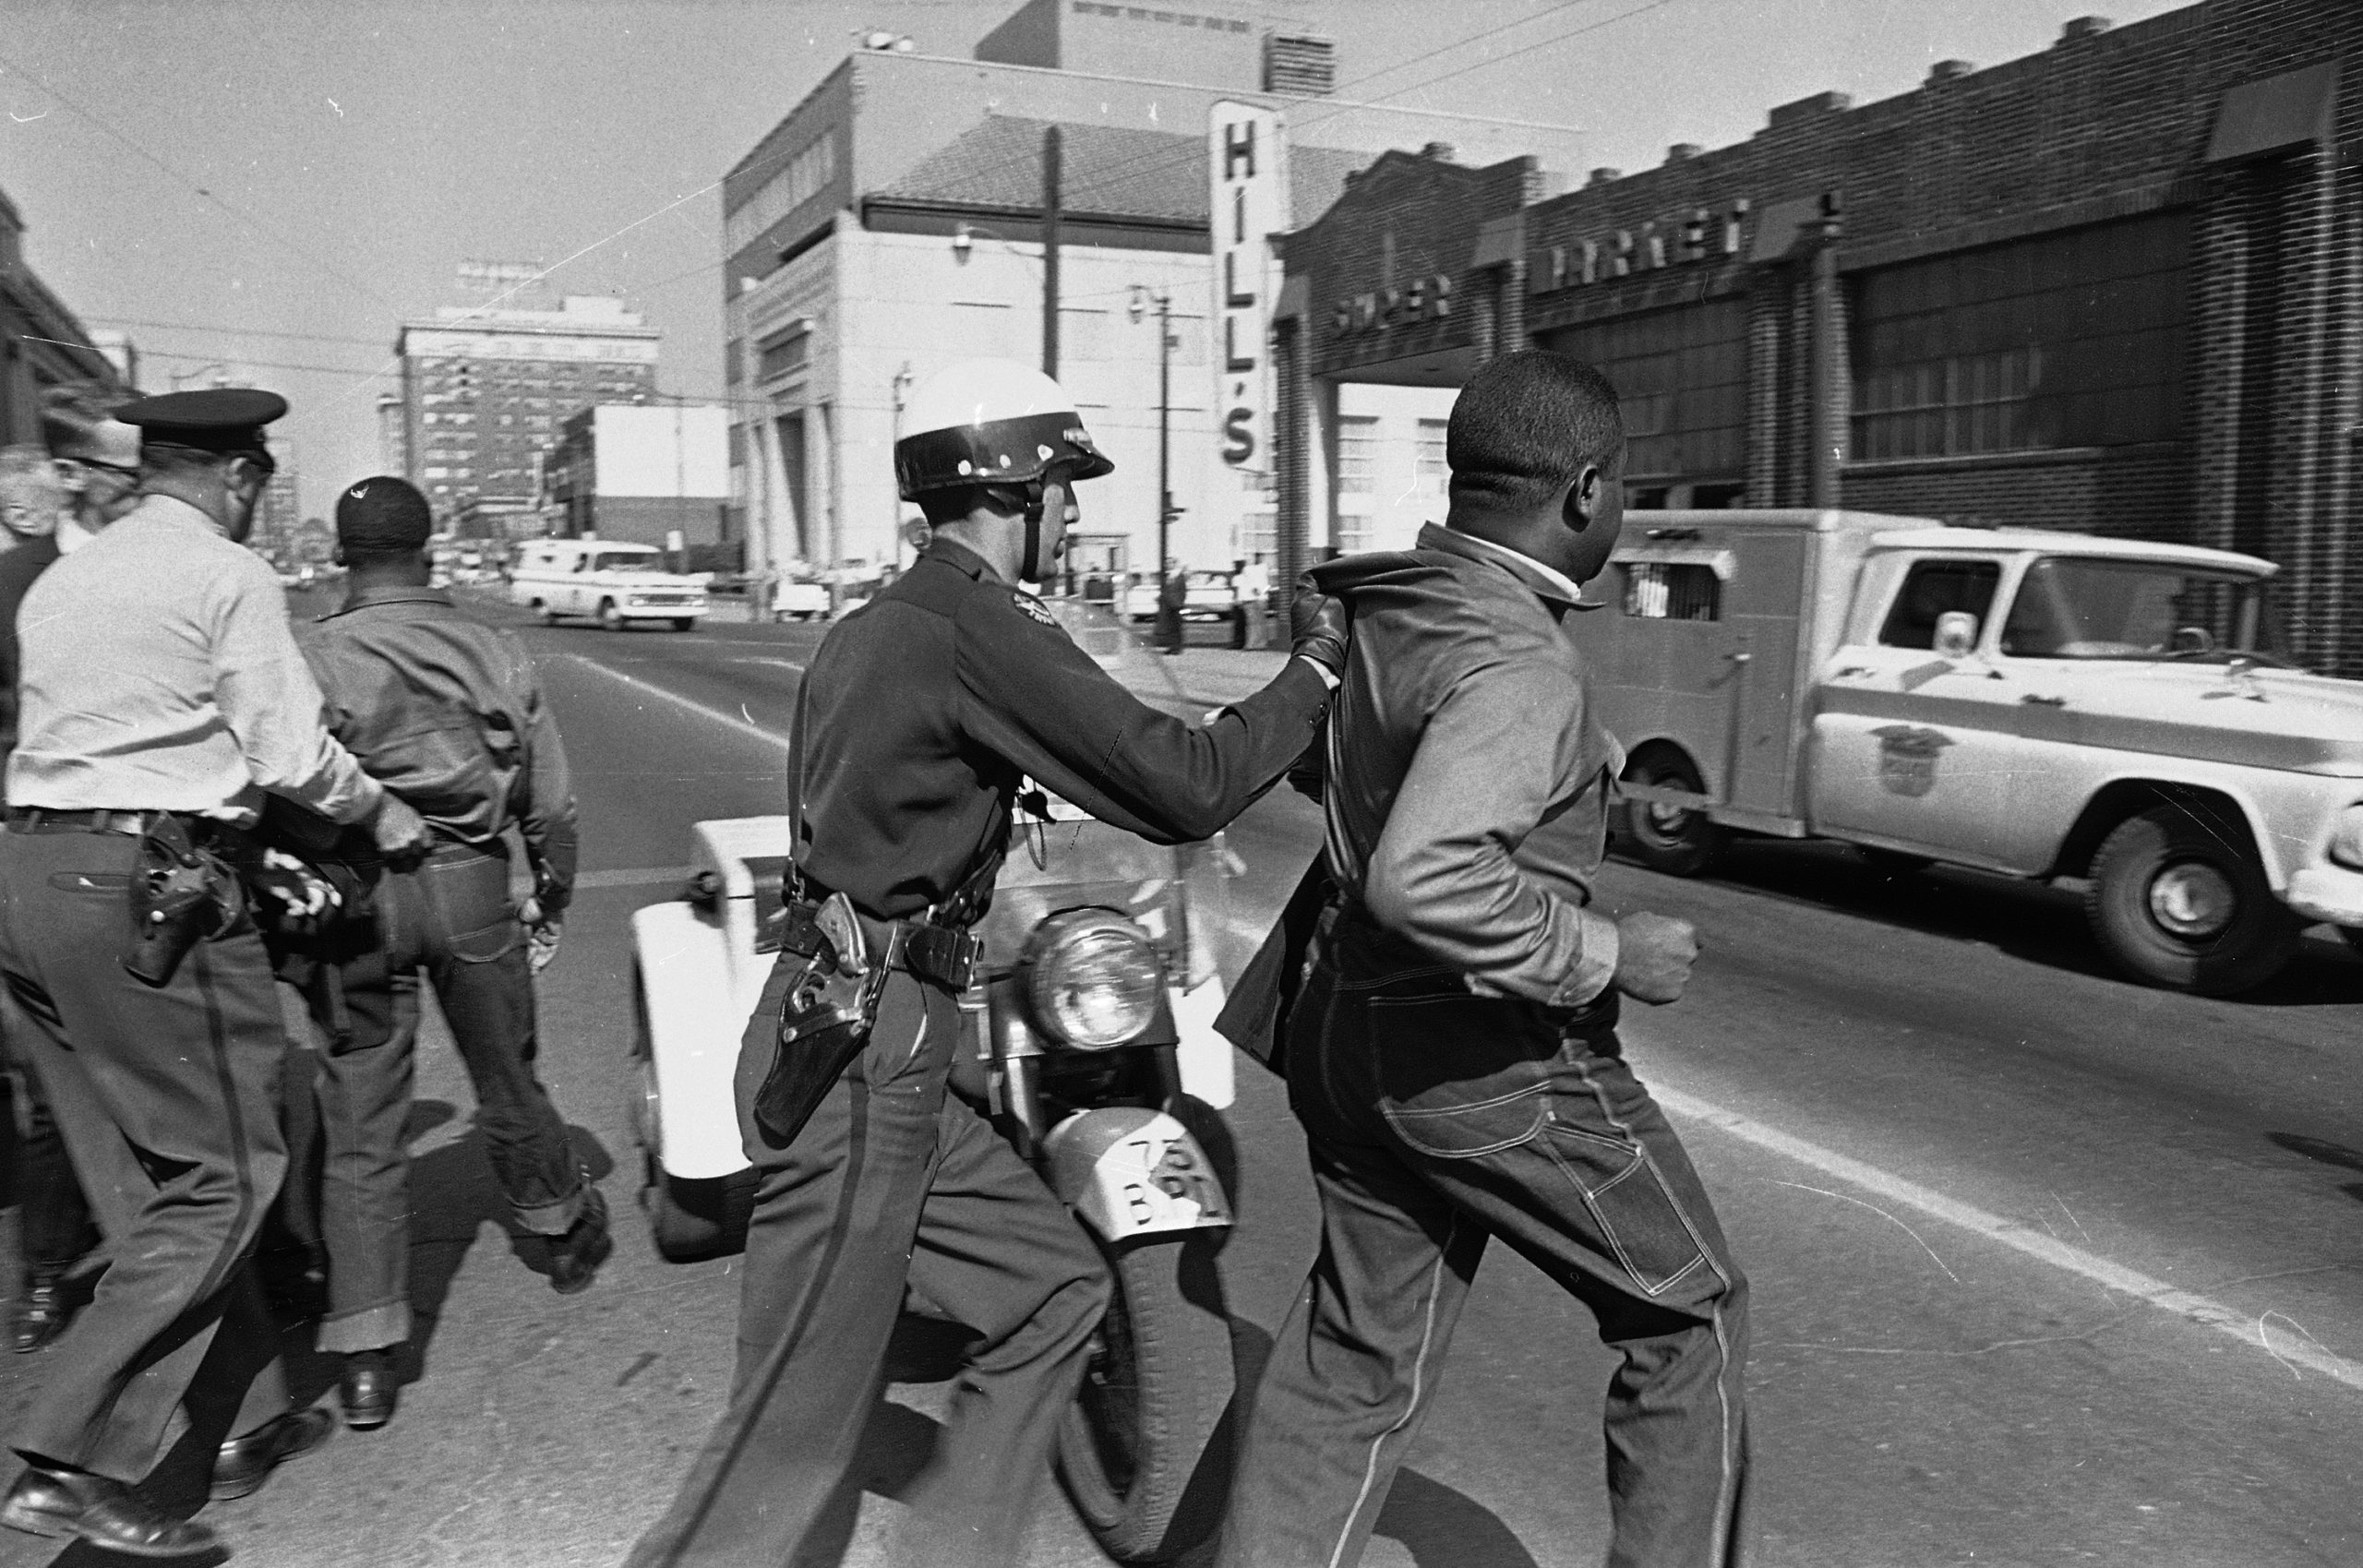 Police officers, wearing helmets, are seen carrying away two Black men. The people in the photo are in the middle of a street. Cars and buildings can be seen in the background.